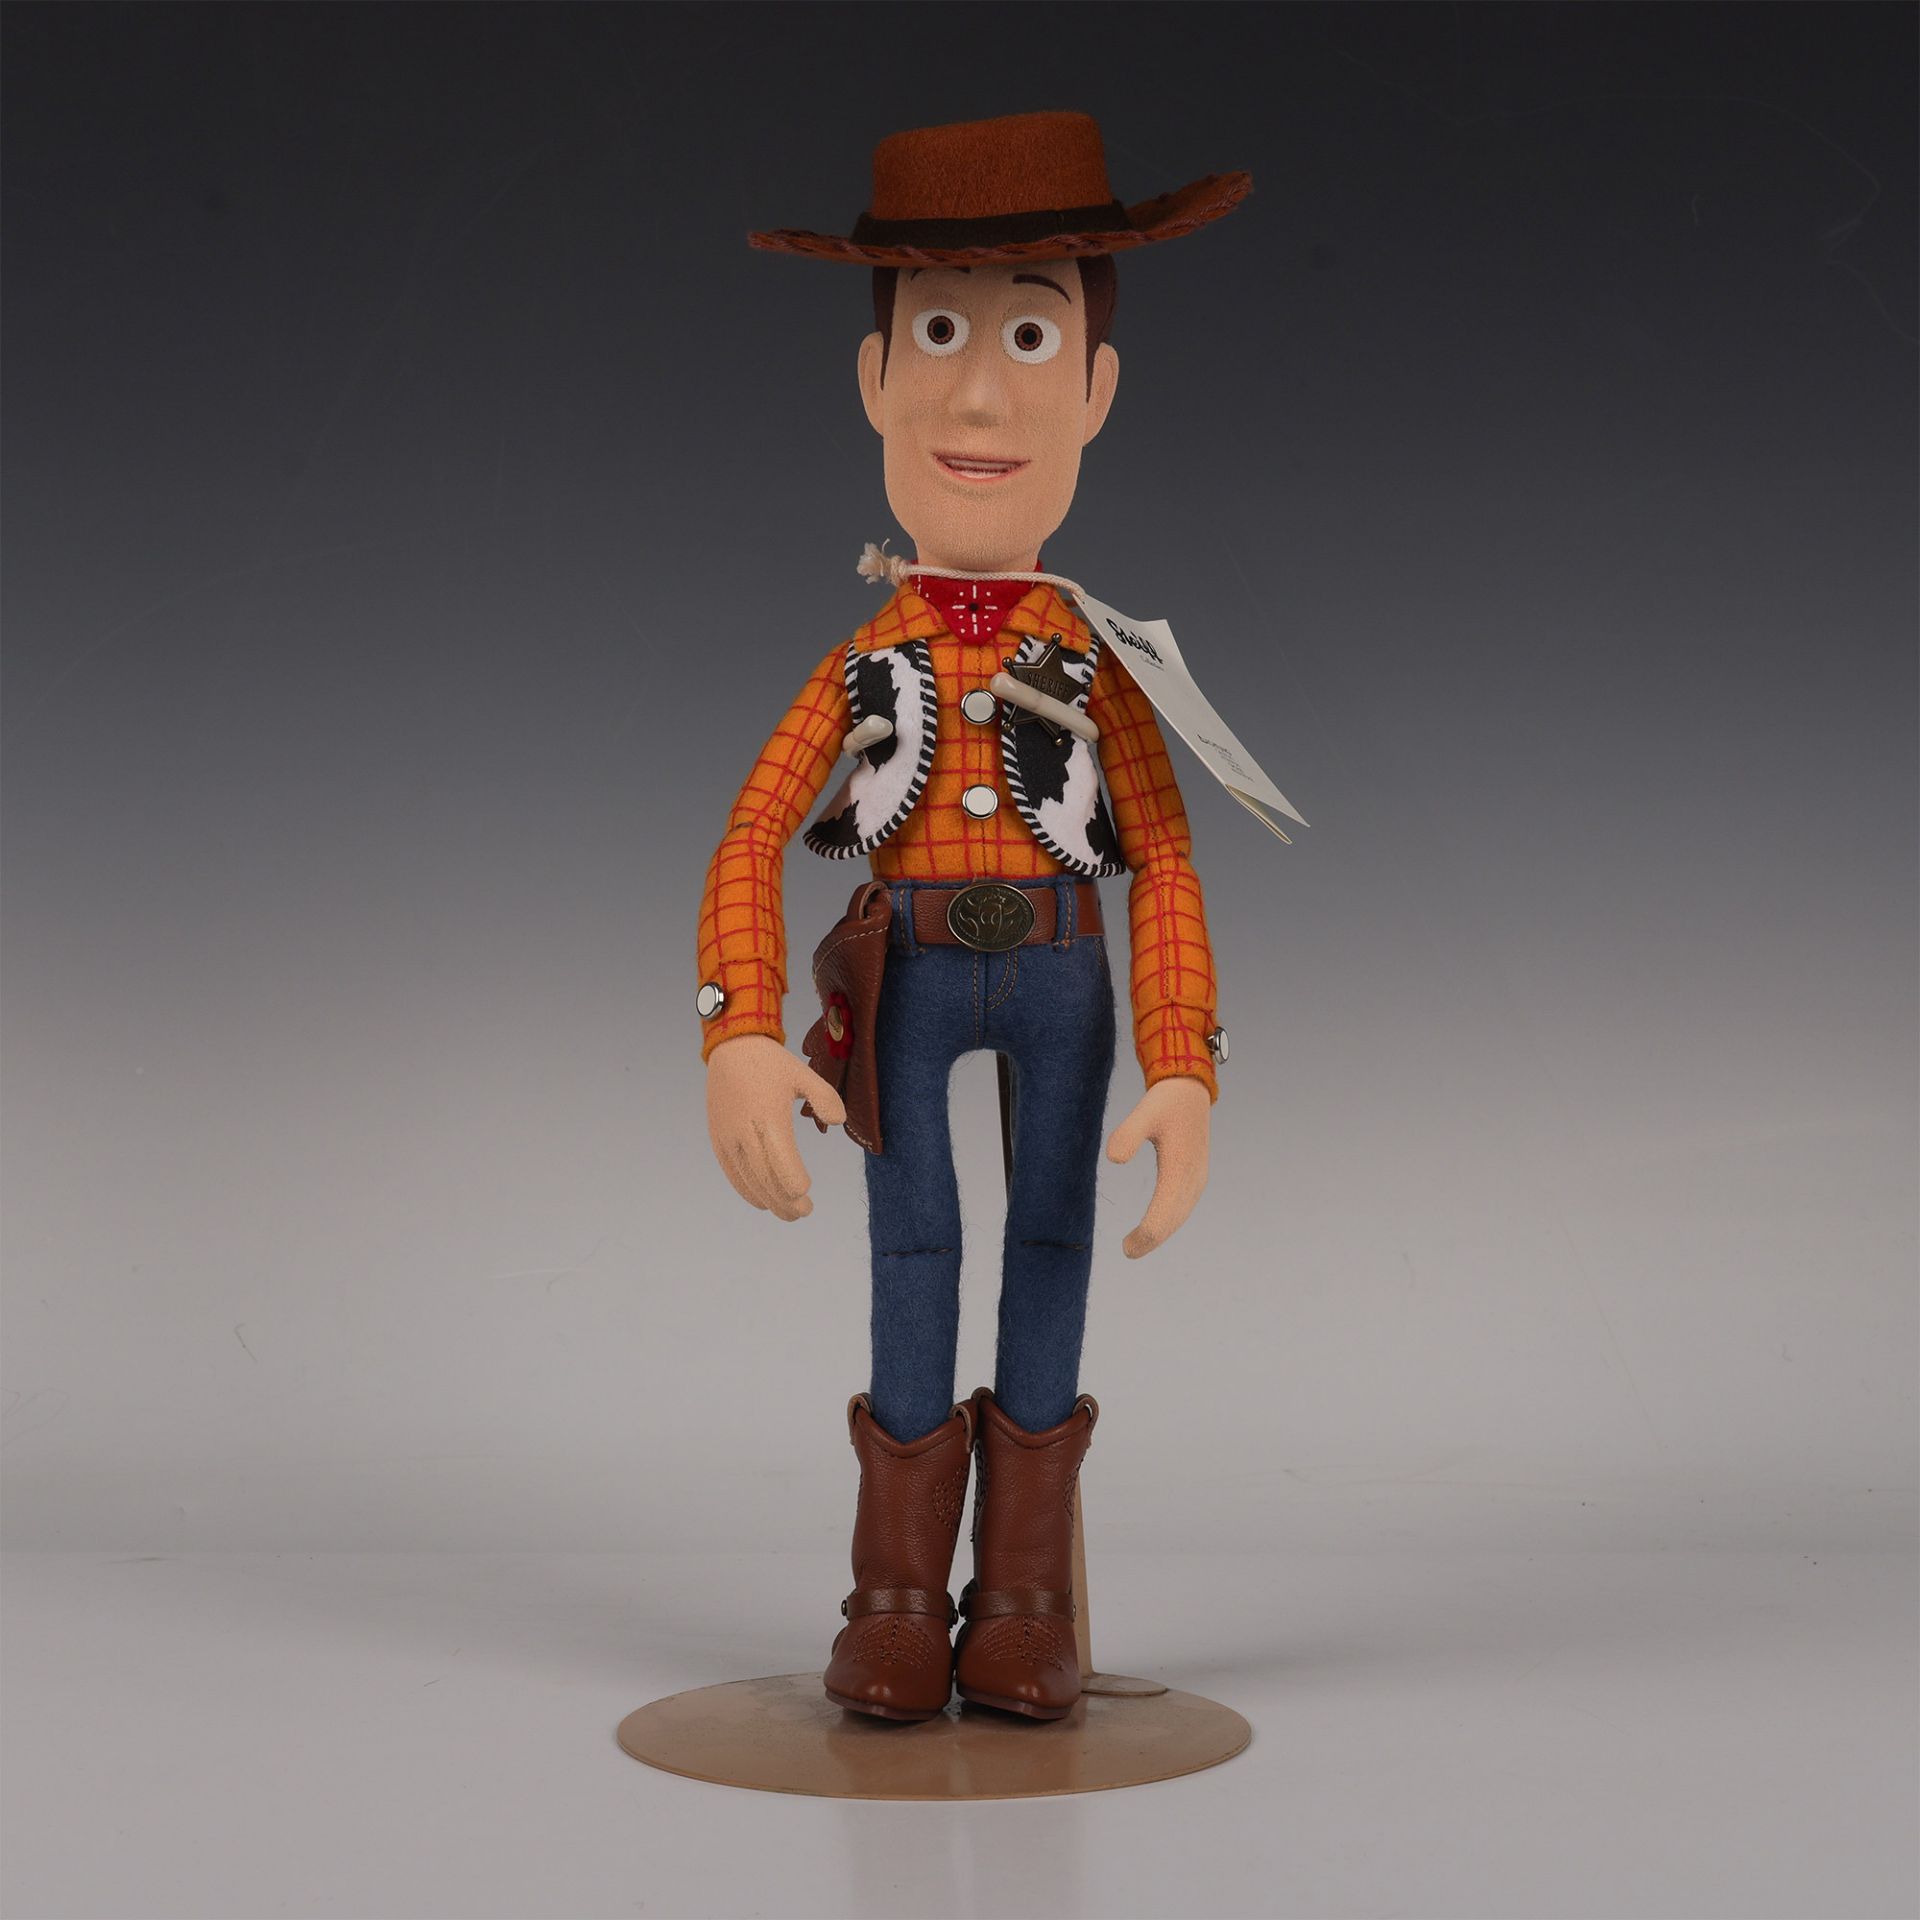 Steiff Character, Woody from Disney/Pixar's Toy Story